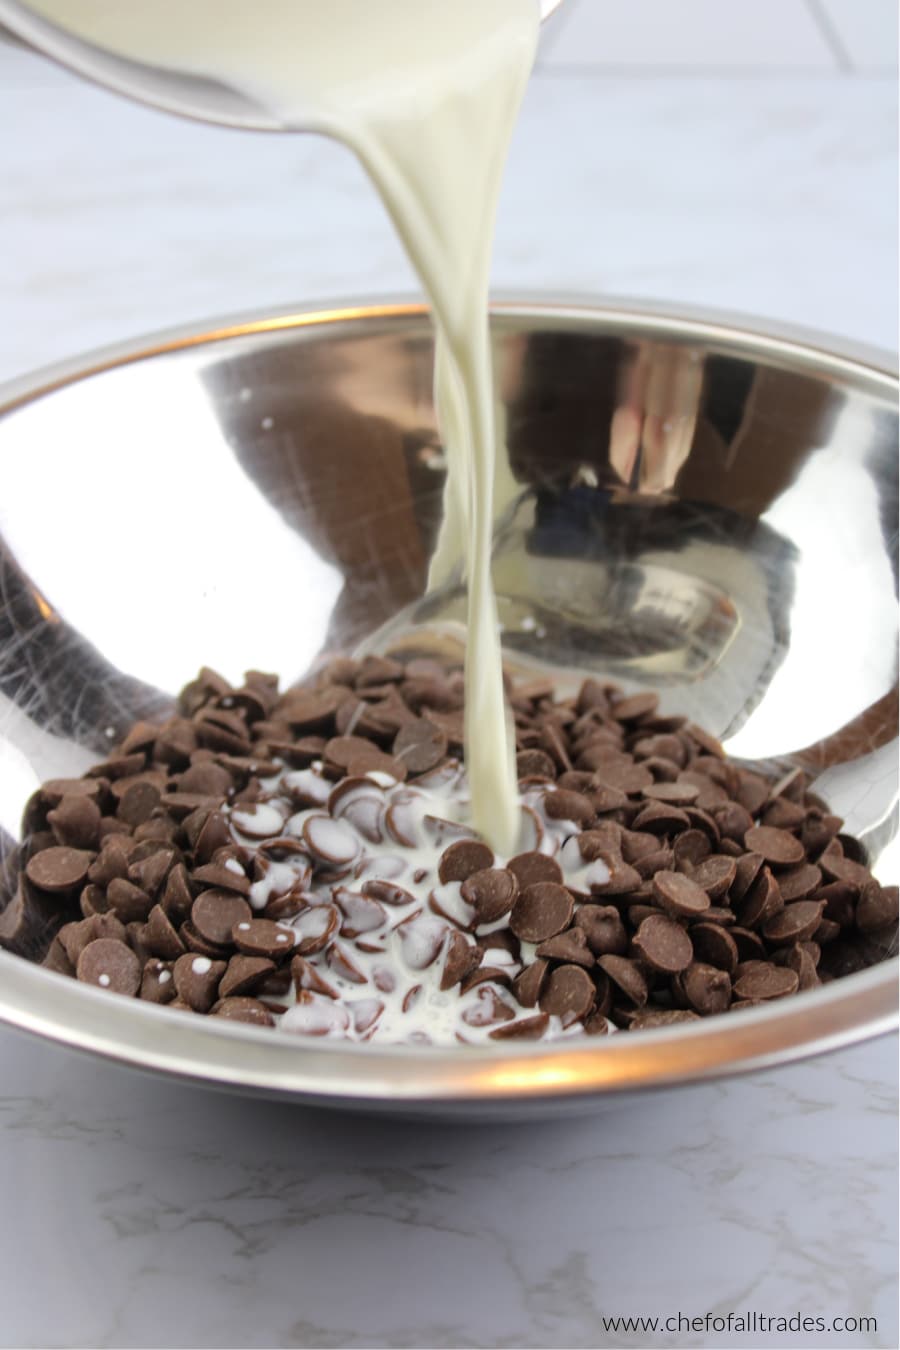 pouring heavy cream into chocolate chips to make ganache